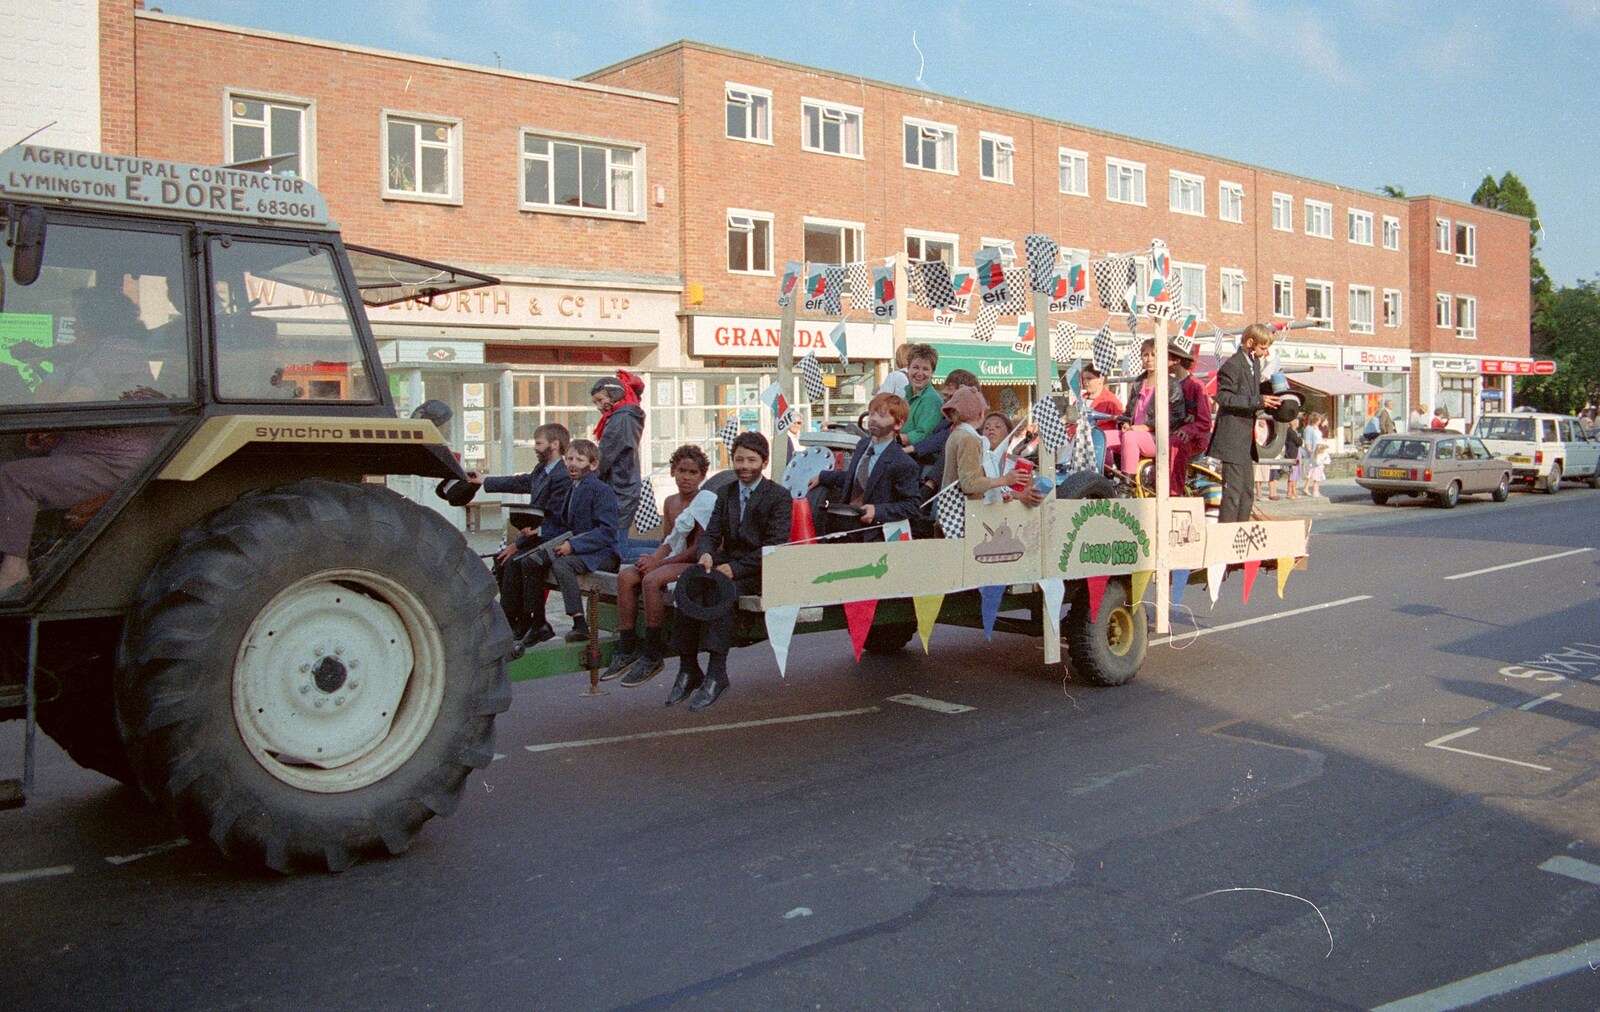 Hill House School's 'Wacky Races' float from Sean and the New Milton Carnival, Hampshire - 1st August 1986